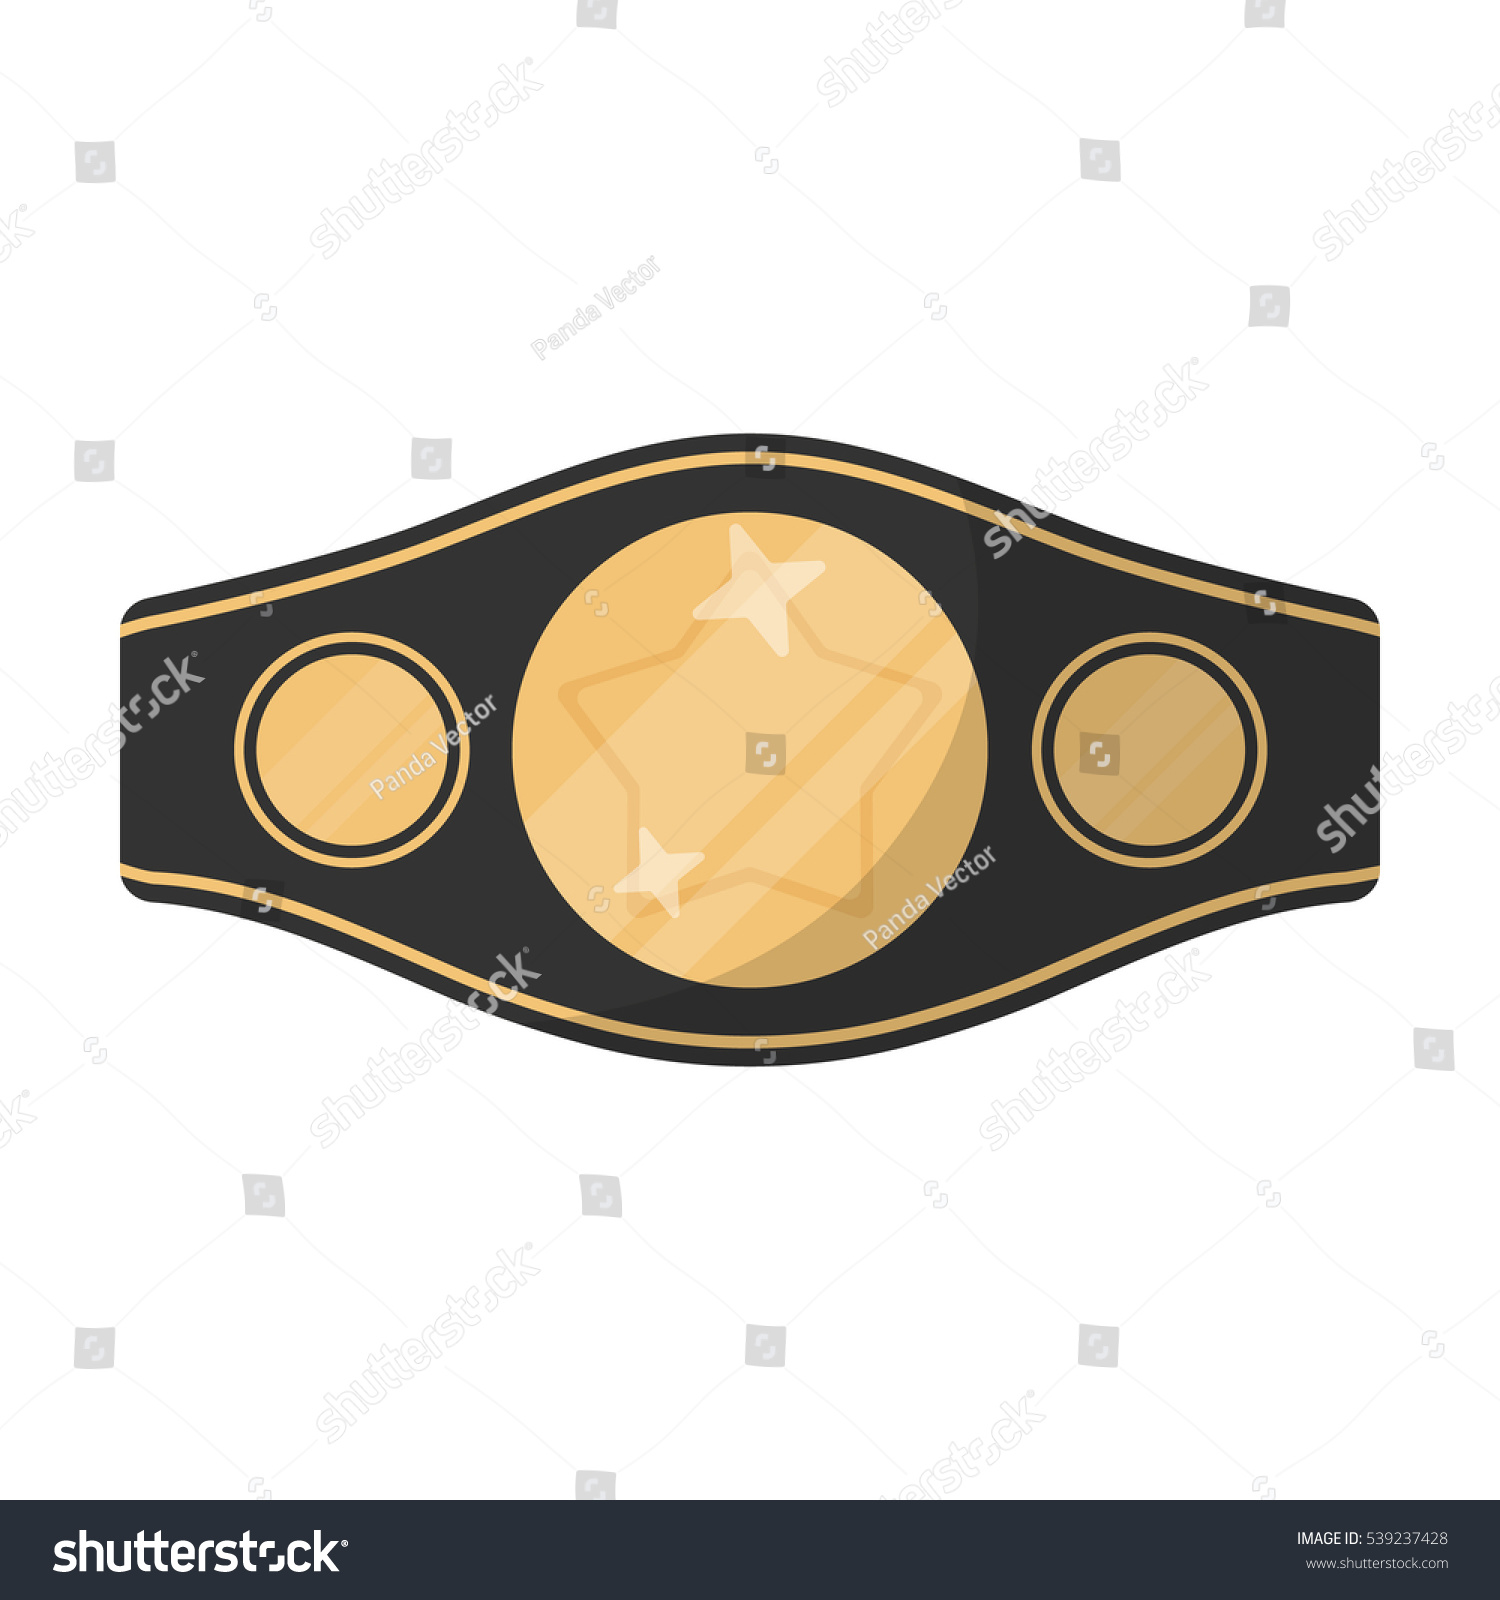 SVG of Boxing championship belt icon in cartoon style isolated on white background. Boxing symbol stock vector illustration. svg